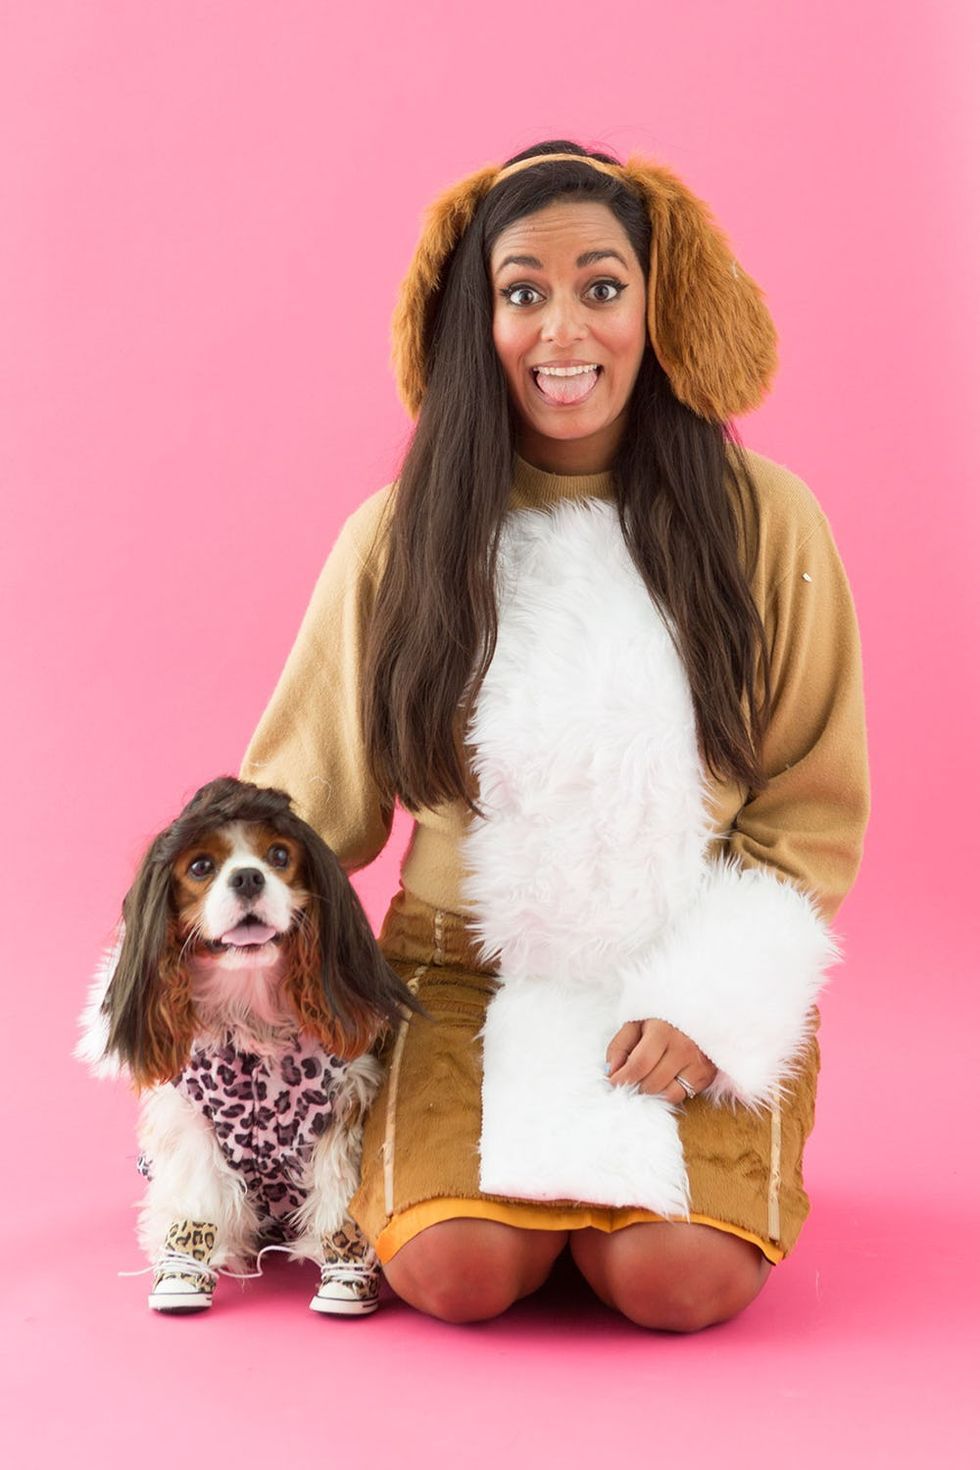 Fun Halloween Costume Ideas For You and Your Dog - Cascade Kennels